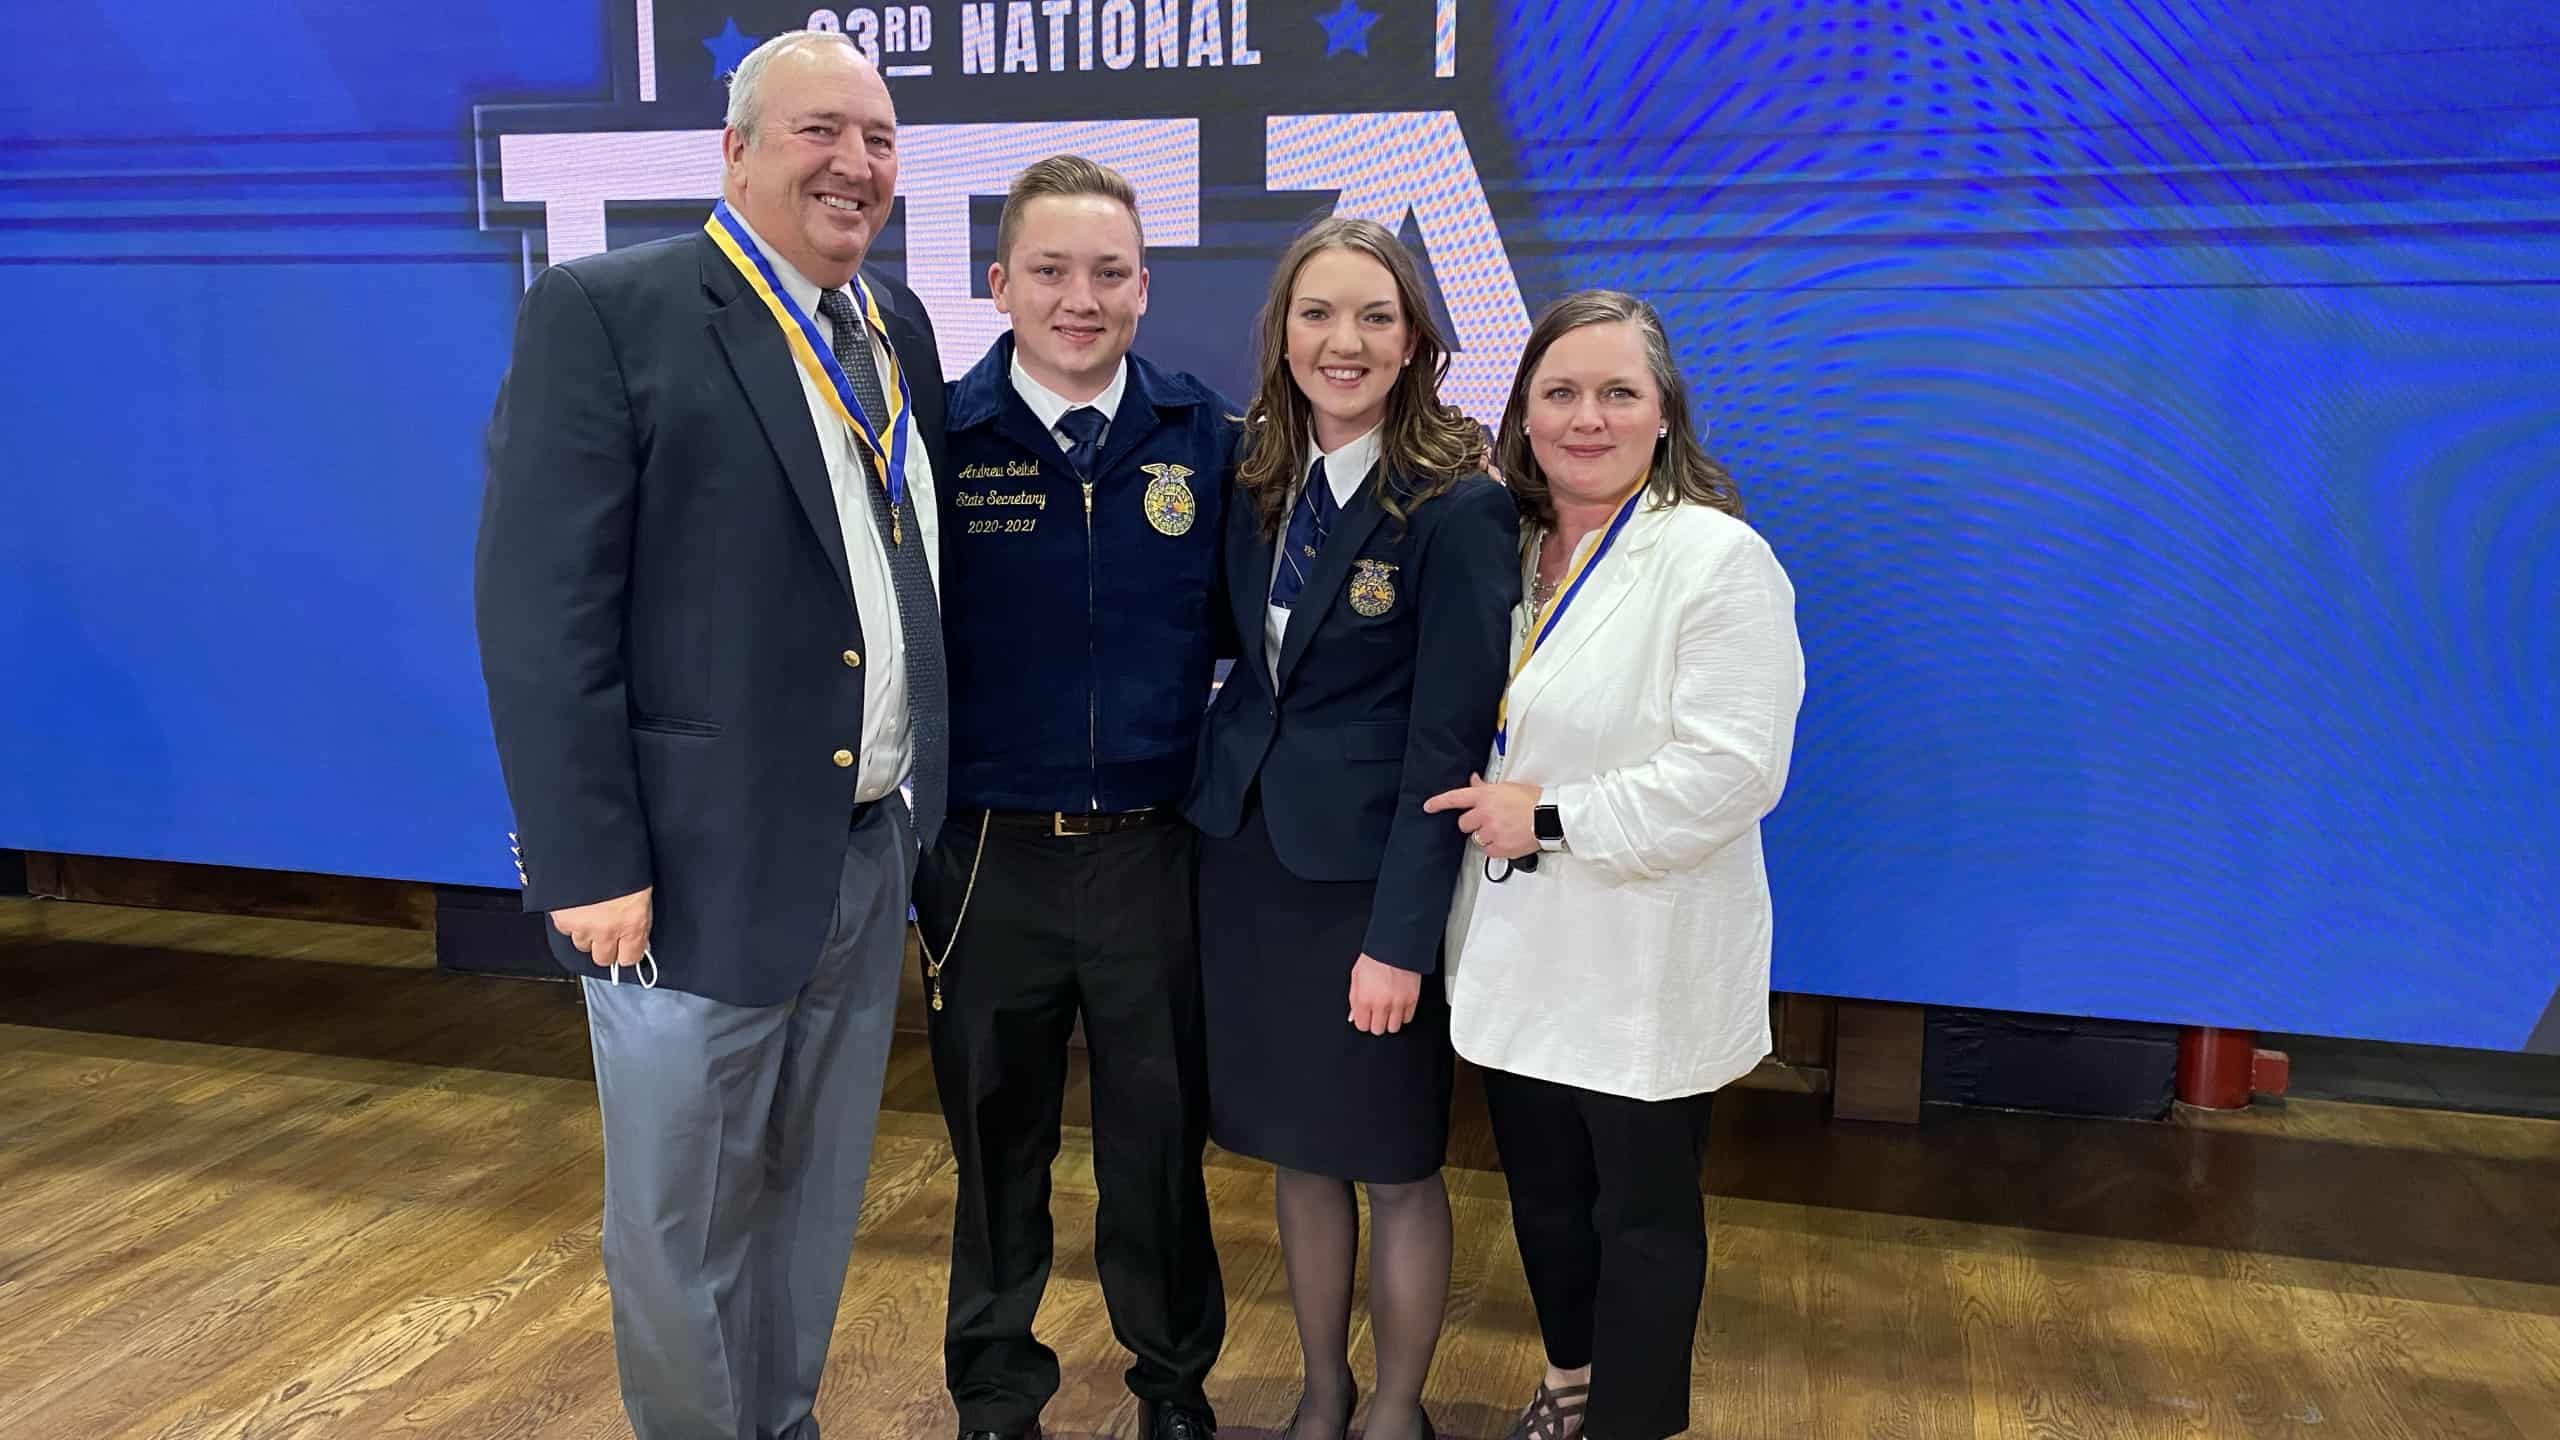 2018-19 National FFA Officer Team Elected at the 91st National FFA